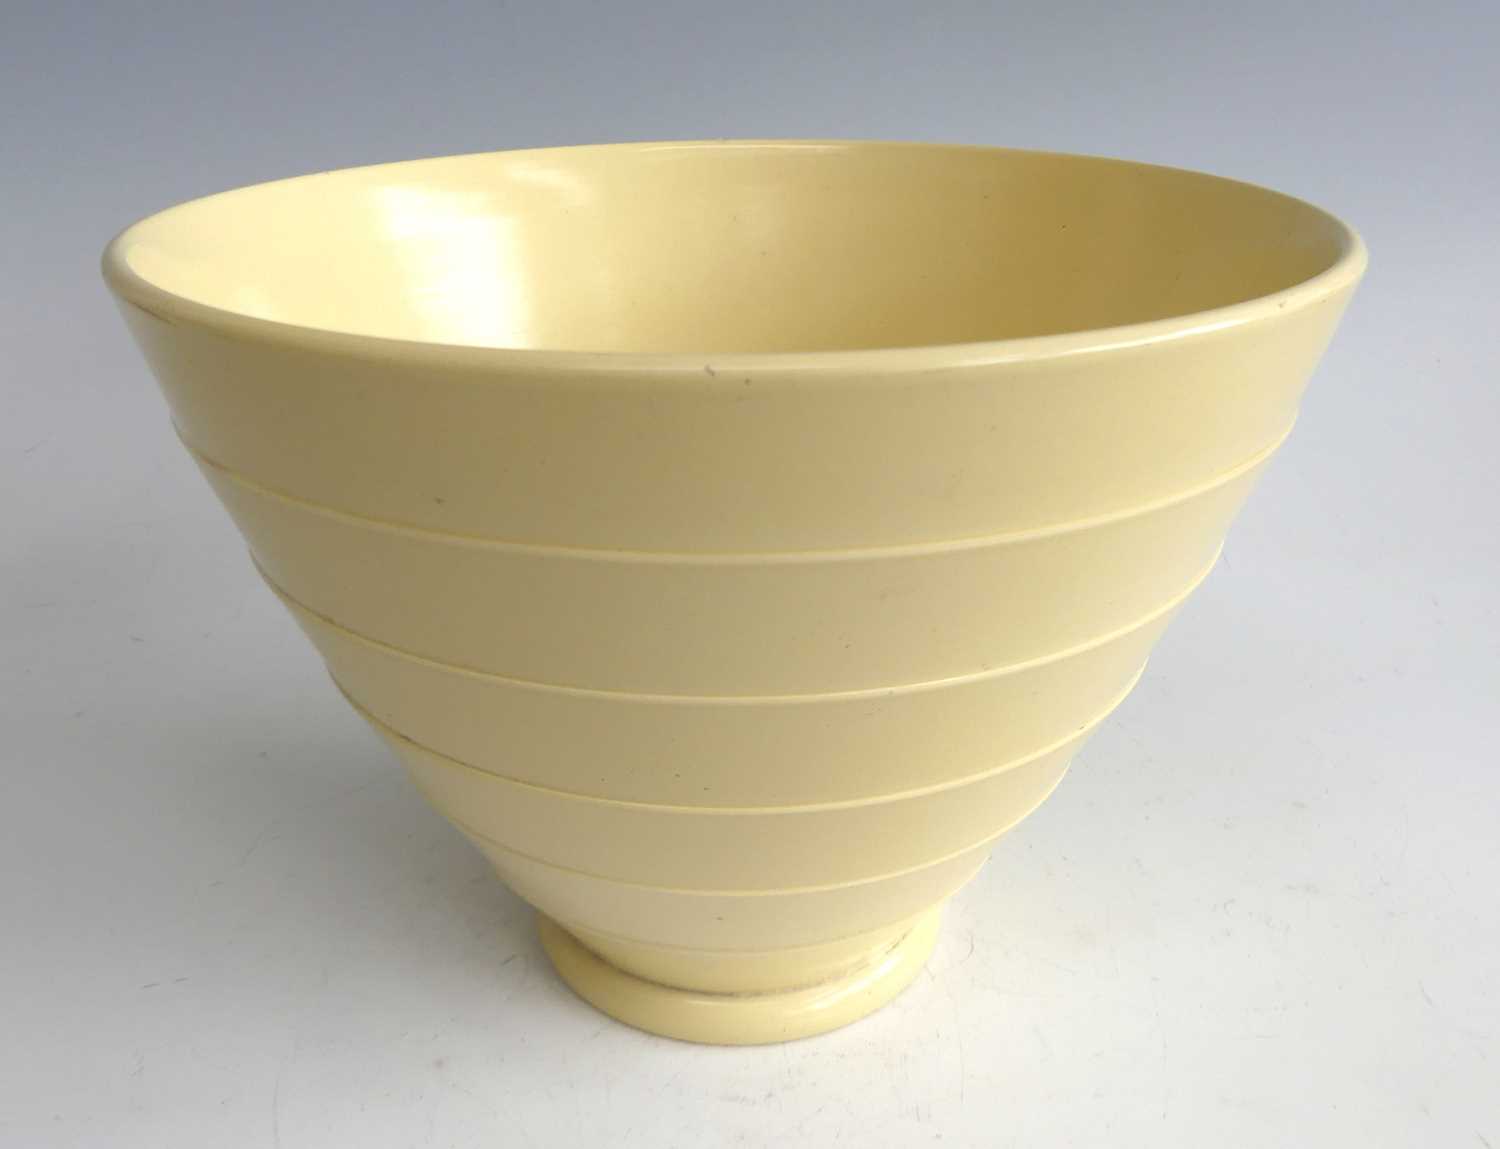 Keith Murray (1892-1981) for Wedgwood - a large matt straw glaze pottery table bowl, with six